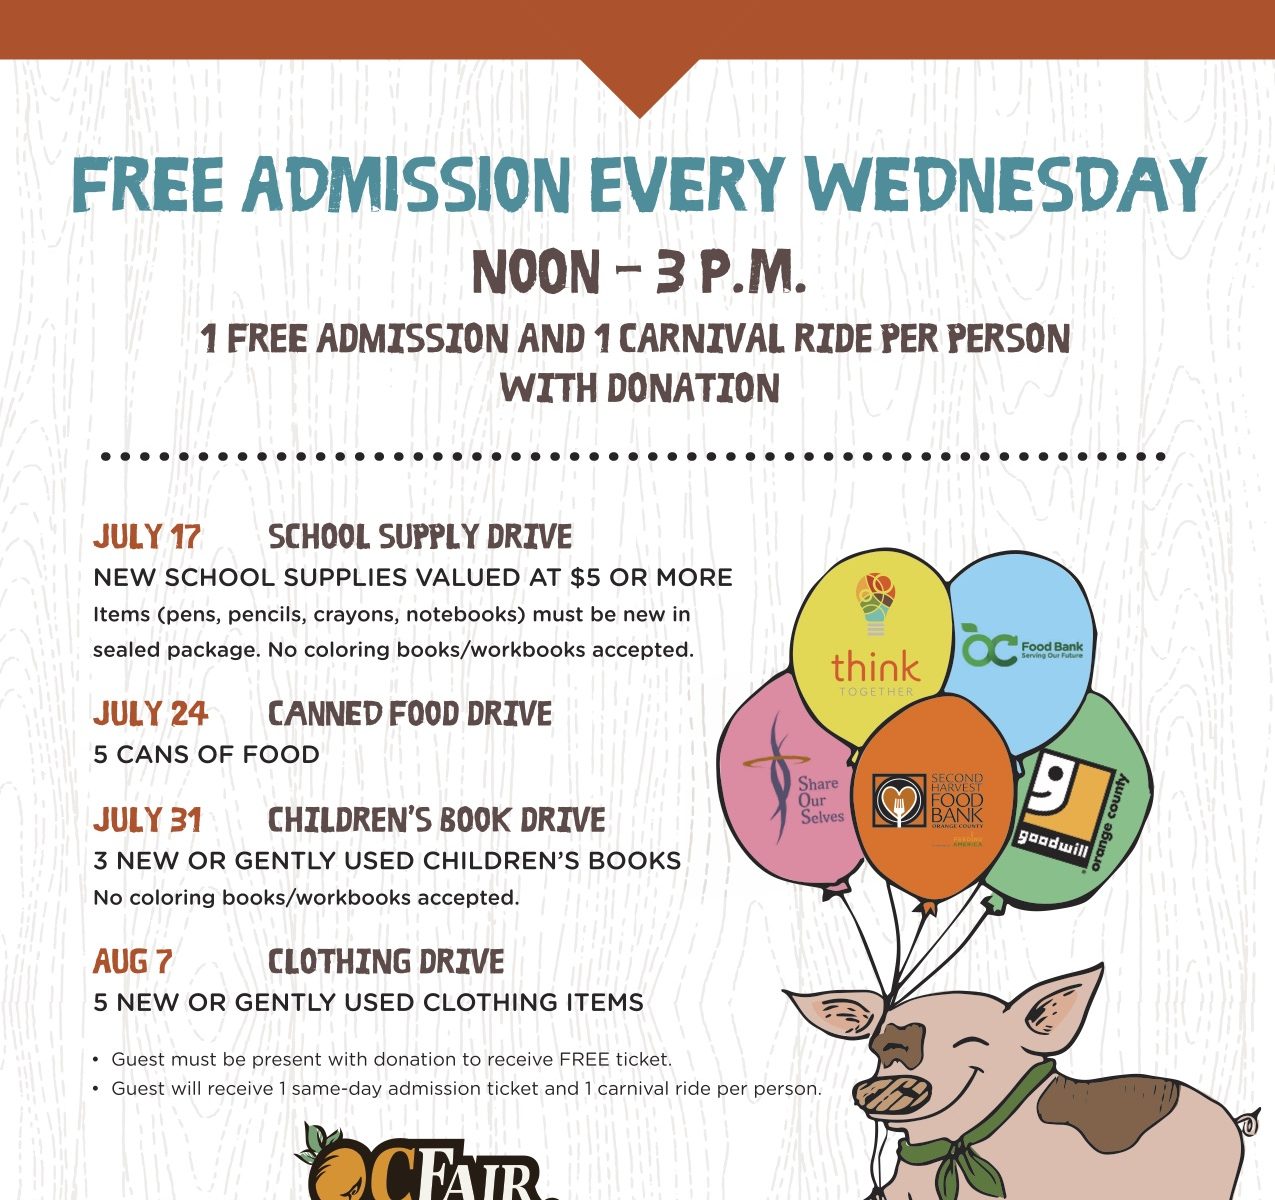 OC Fair We Care Wednesday Invitation card with events listed